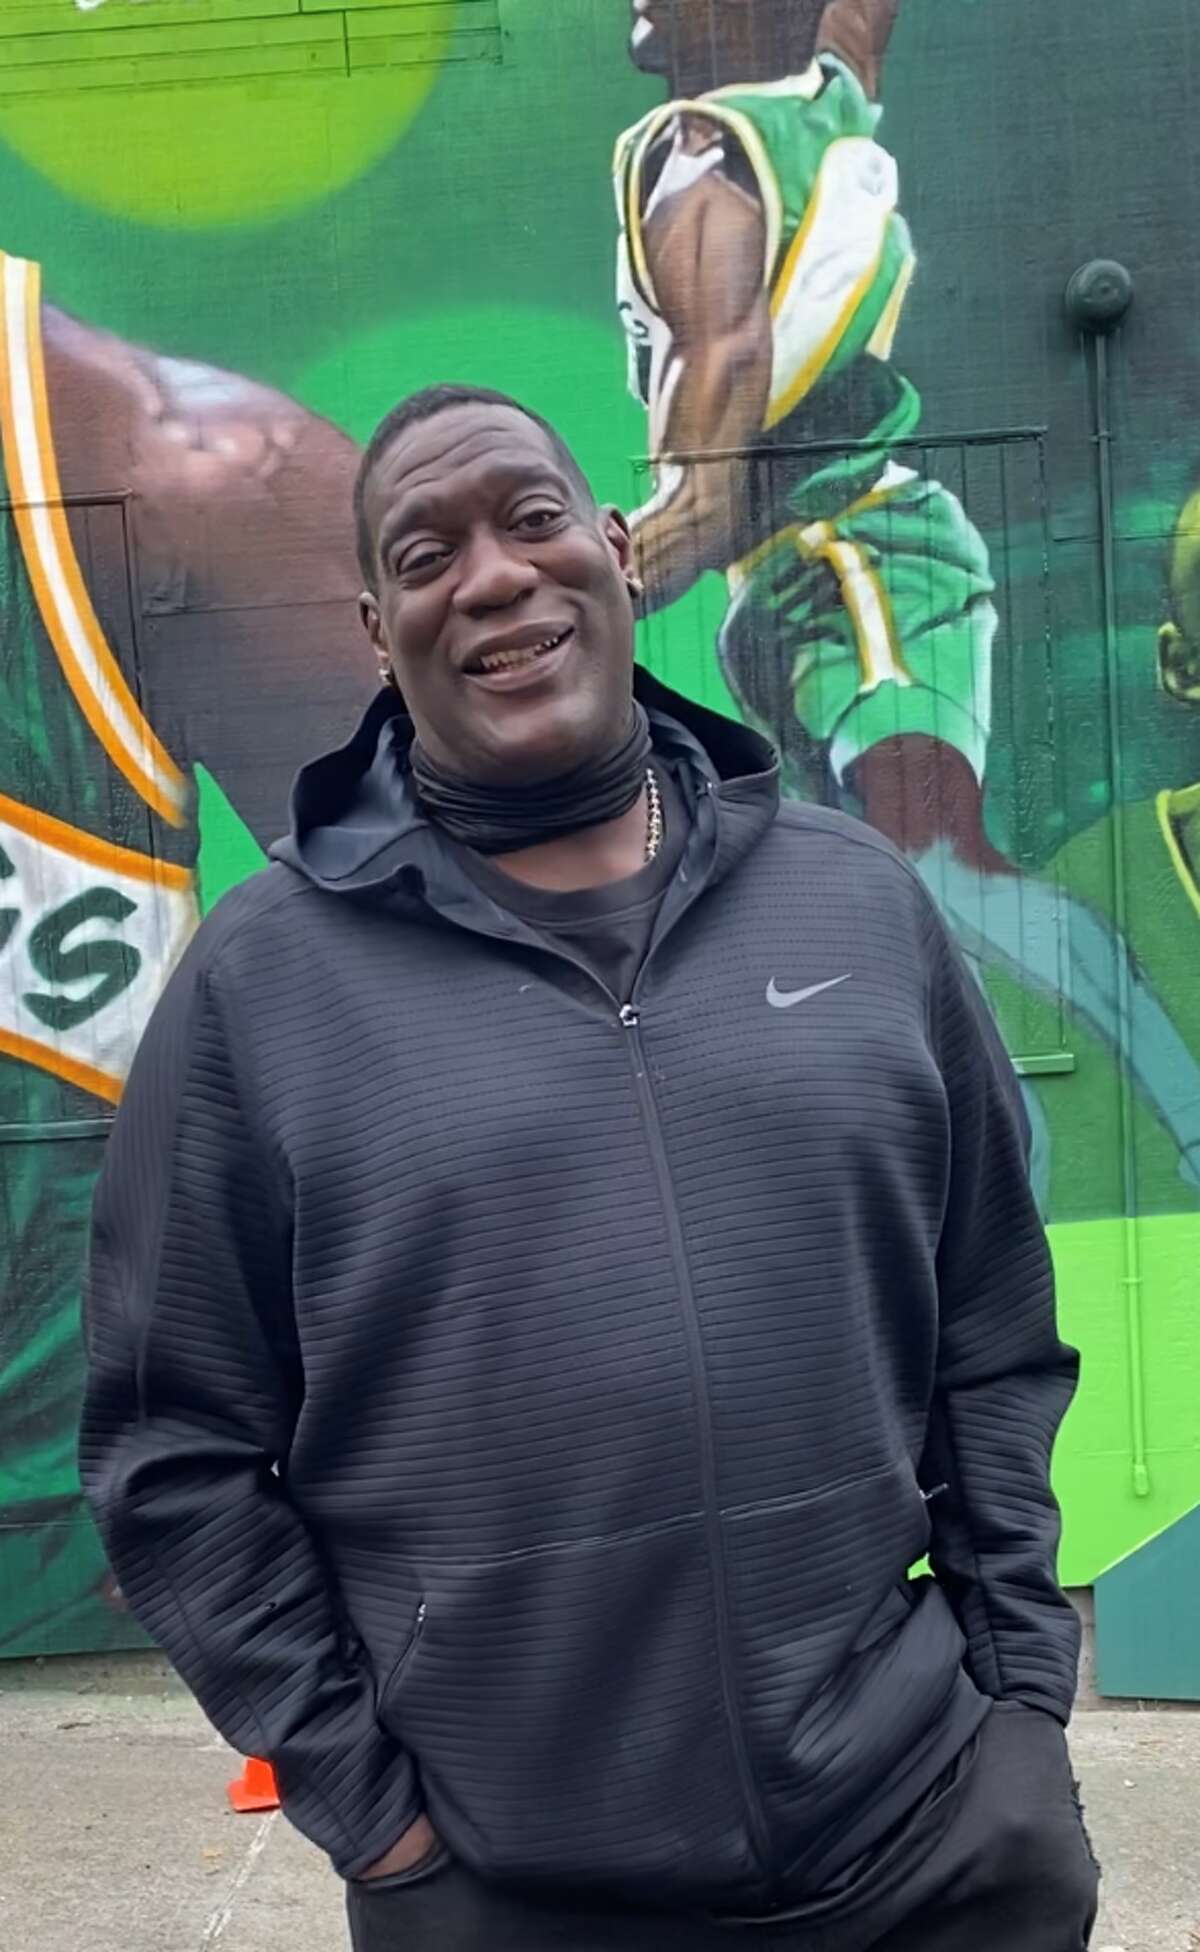 Former NBA star Shawn Kemp, the high-flying forward who starred for Seattle’s former NBA franchise in the 1990s, is opening up his cannabis shop on Oct. 30, according to a press release.